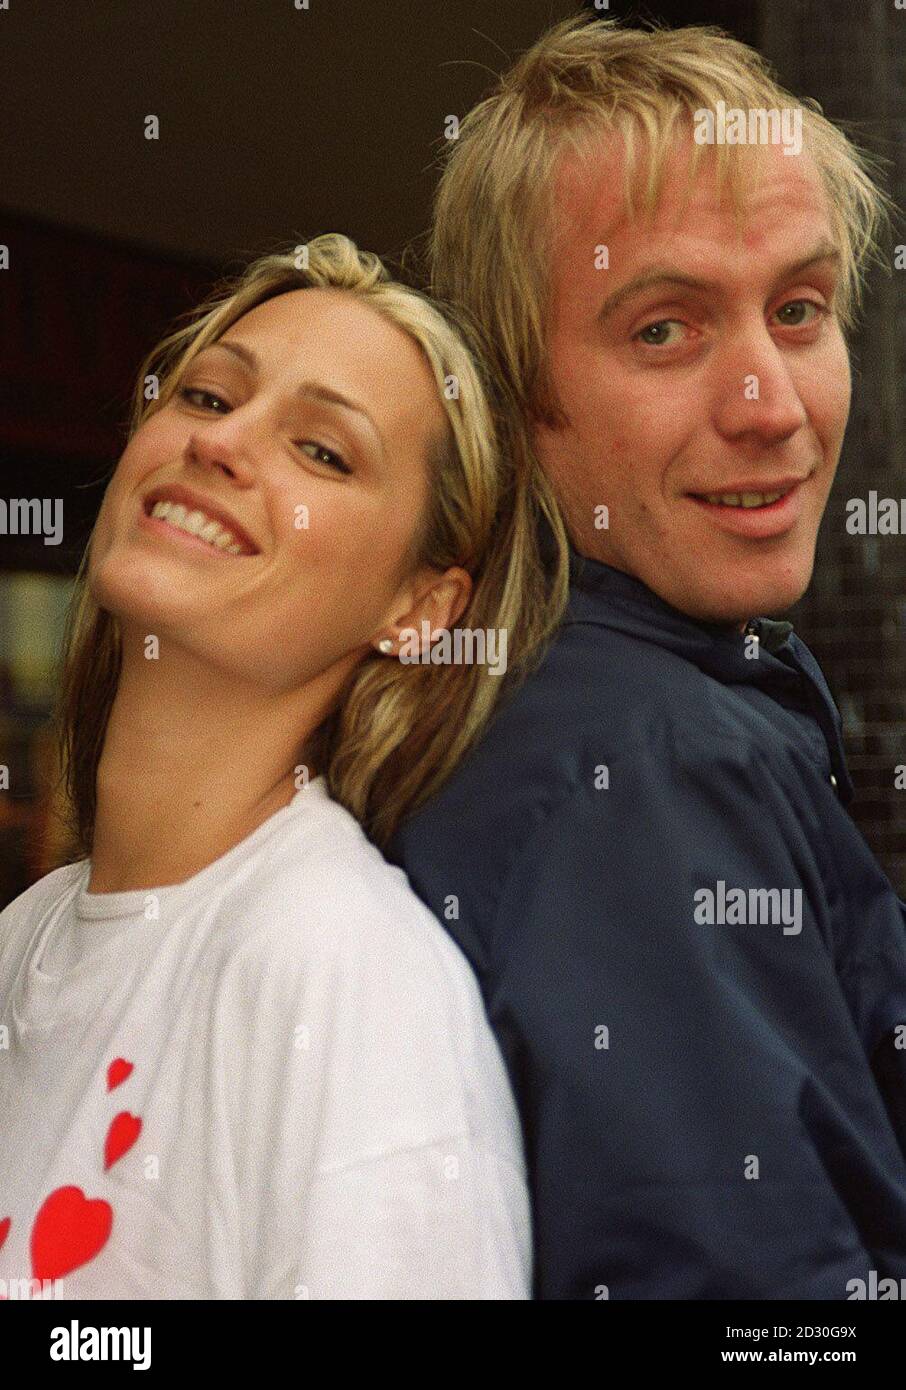 Model Yasmin Le Bon and actor Rhys Ifans at the Notting Hill Housing Trust (NHHT) charity shop in Notting Hill Gate for the launch of the video and DVD release of the film Notting Hill which has become the highest grossing British Film ever.   * Money raised through the film sales will go towards the NHHT appeal to house 100 young homeless people in London. Stock Photo